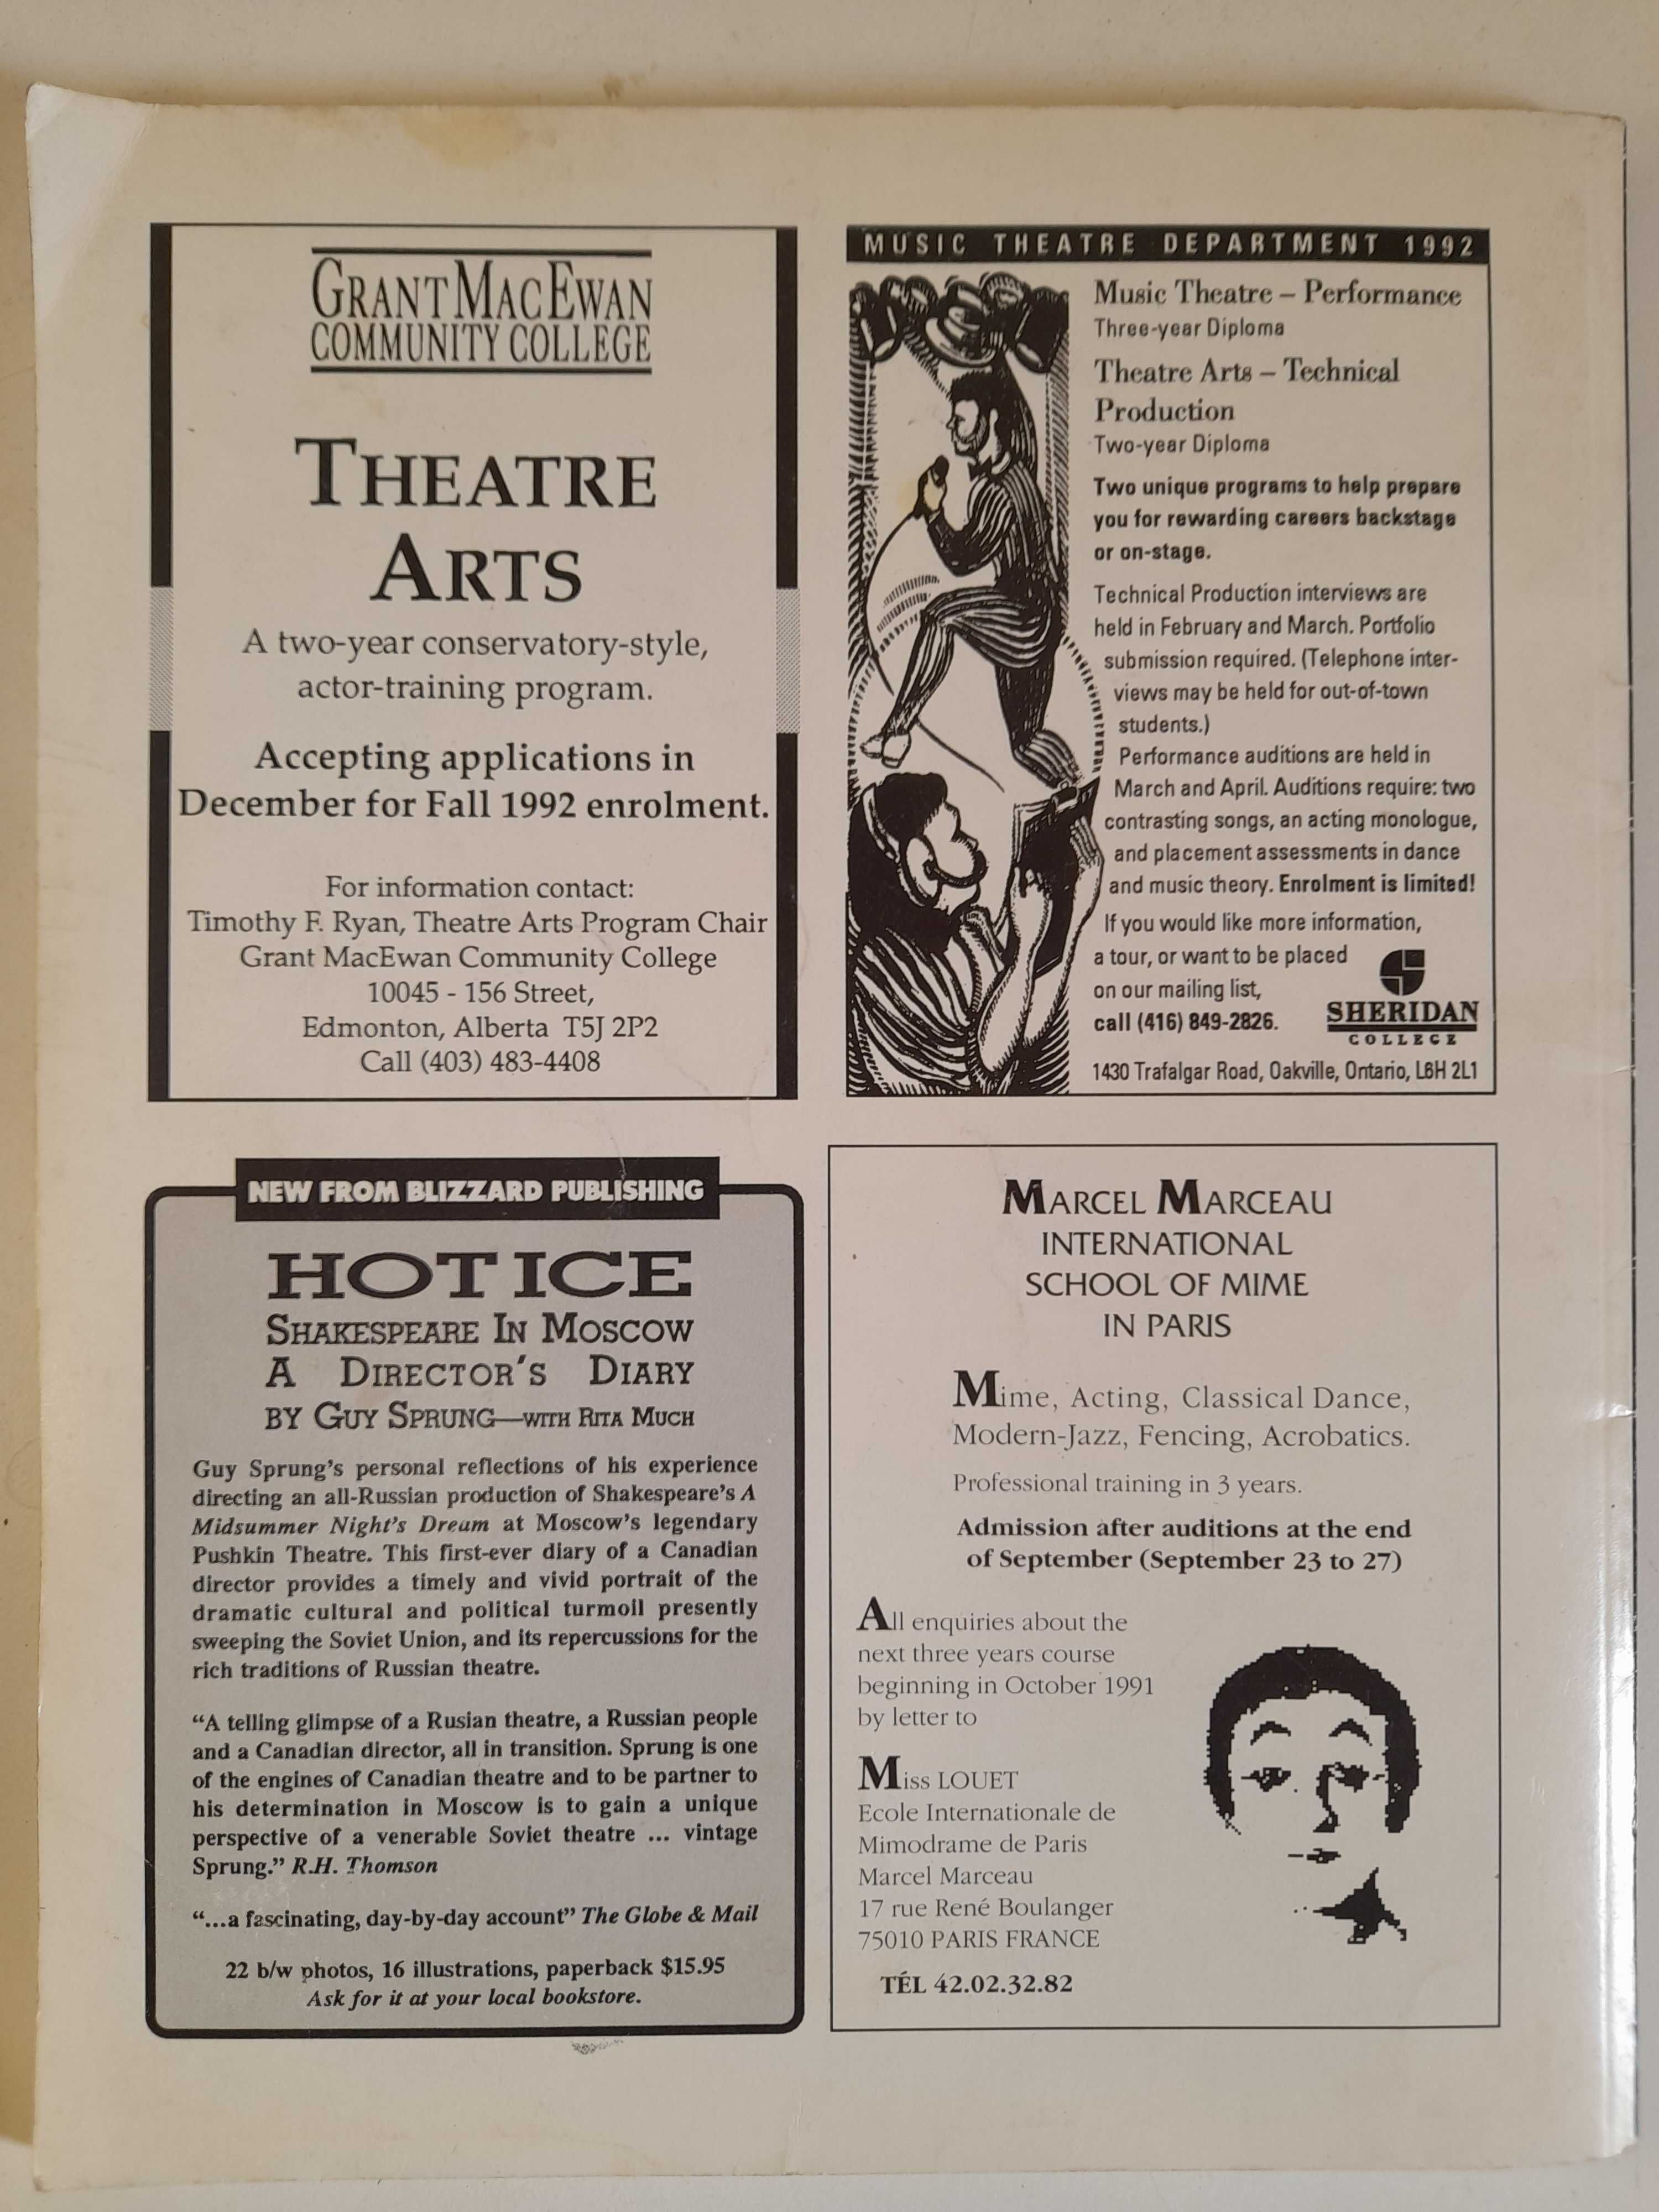 Canadian Theatre Review 1991